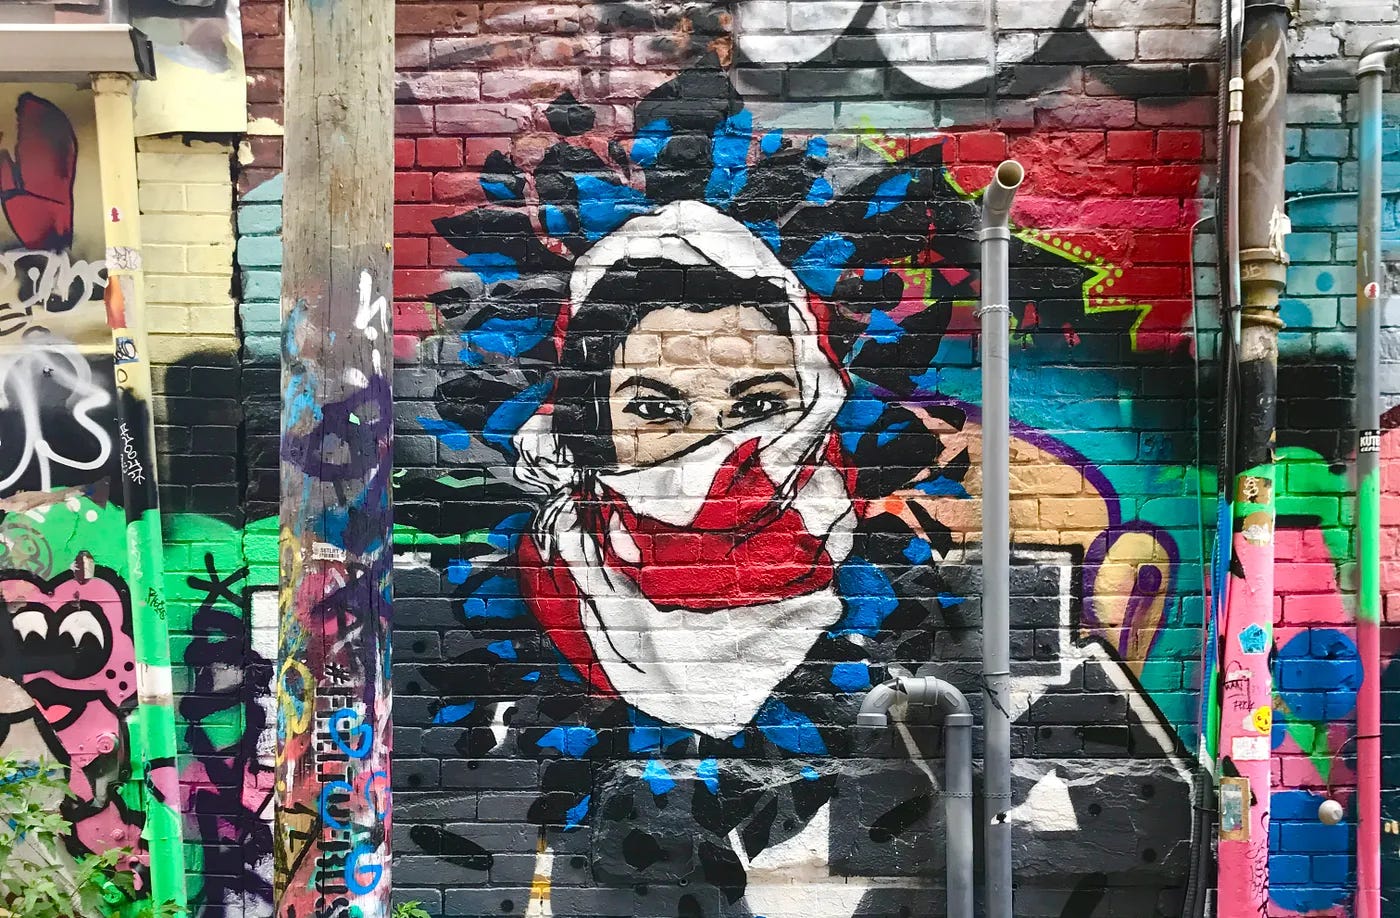 Mural of a woman whose face is covered with a headscarf of the Canadian flag.